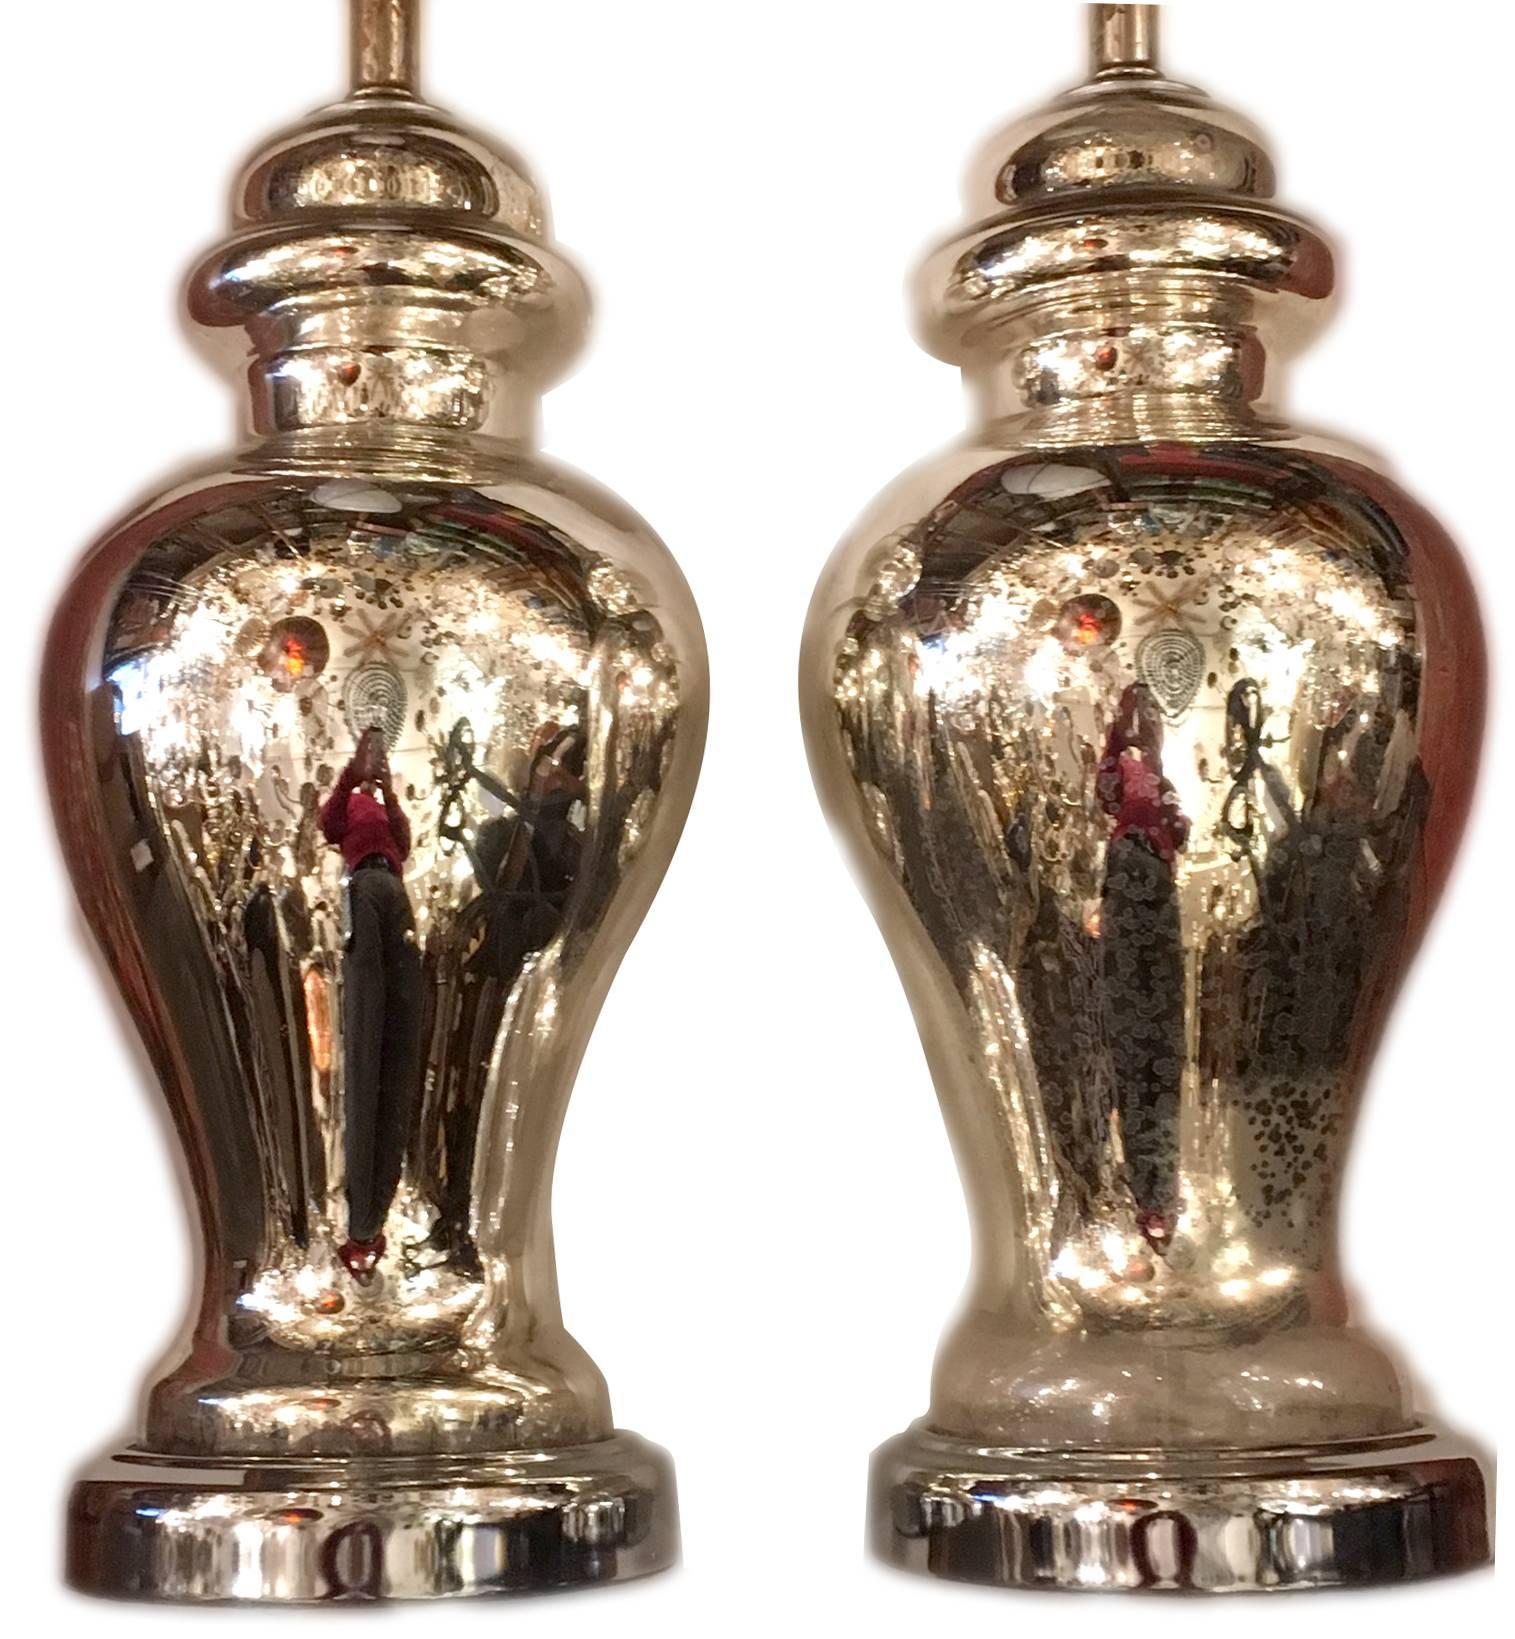 Pair of circa 1930s French mercury glass lamps.

Measurements:
Height of body 18